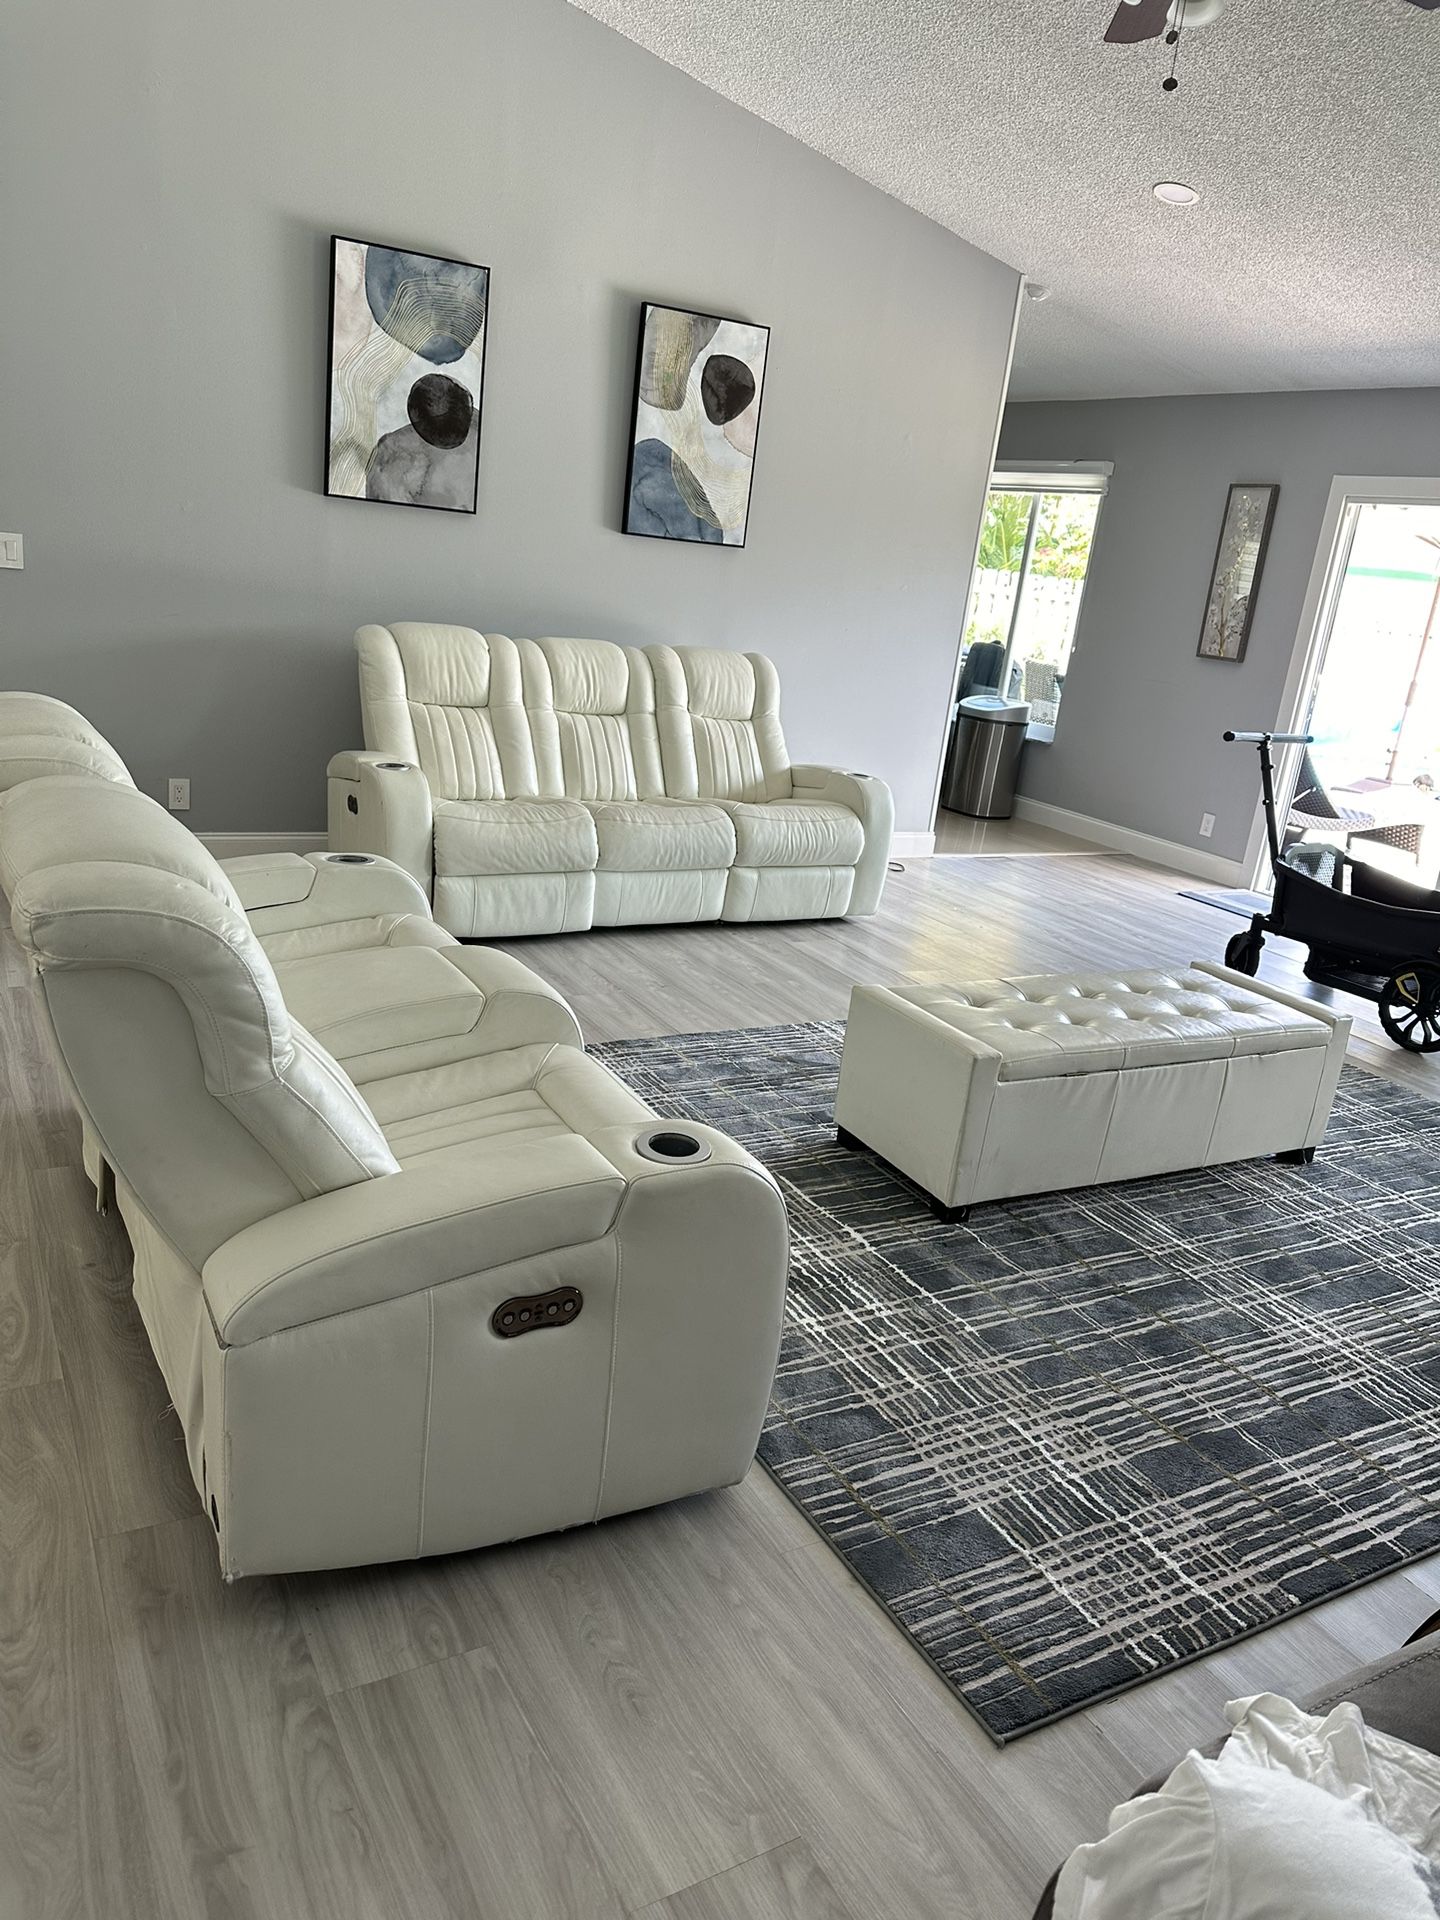 Two Reclinable Sofa With Ottoman